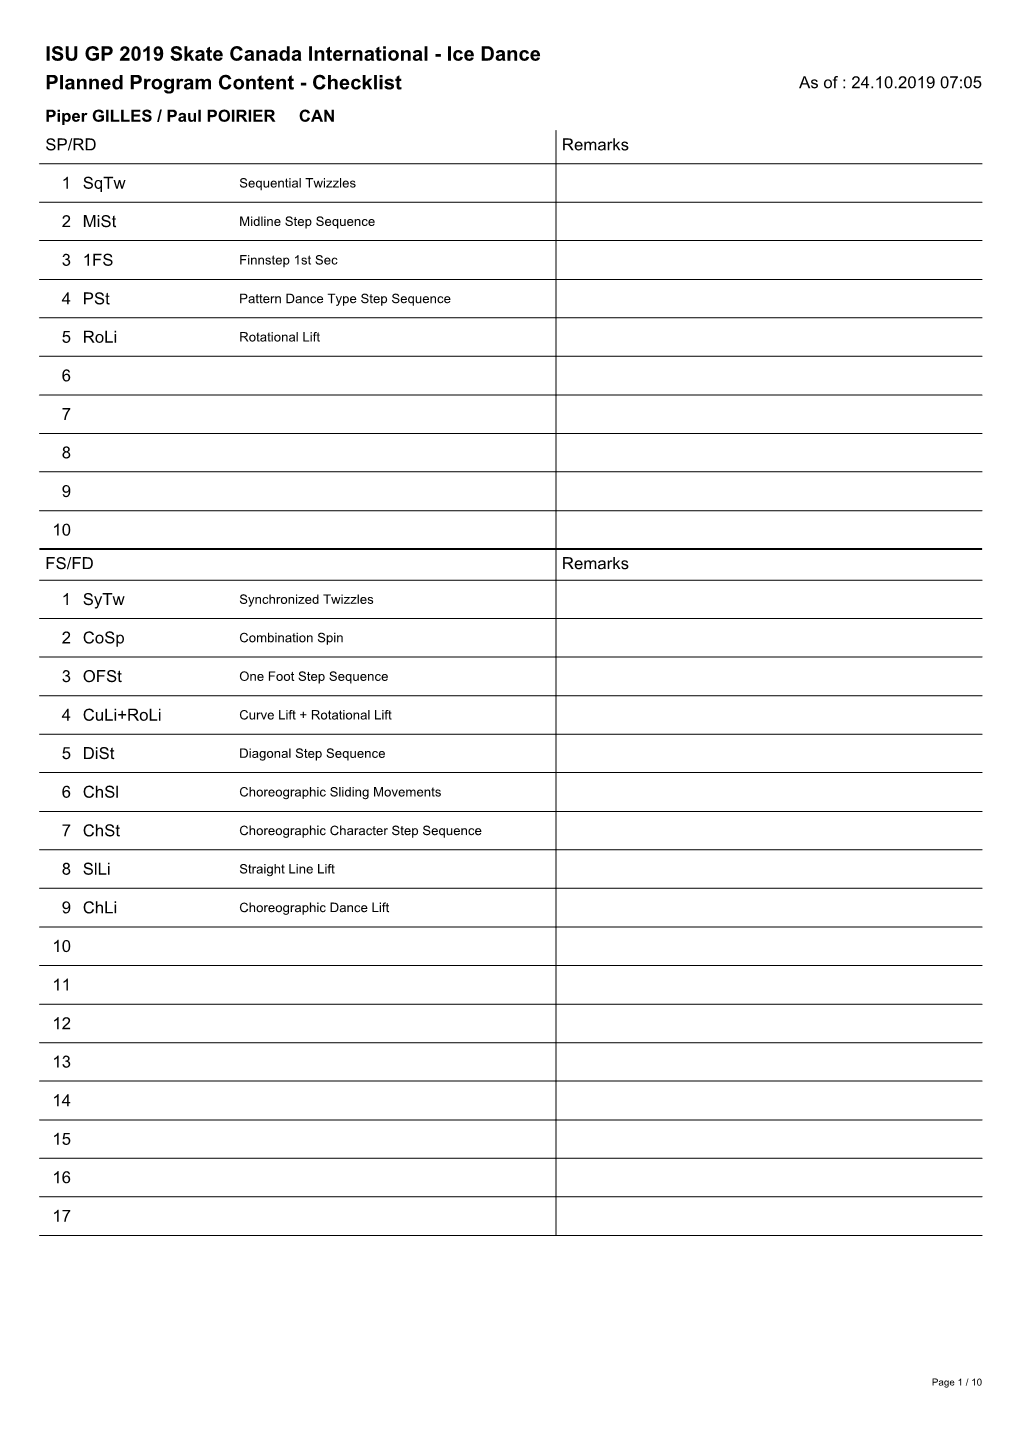 ISU GP 2019 Skate Canada International - Ice Dance Planned Program Content - Checklist As of : 24.10.2019 07:05 Piper GILLES / Paul POIRIER CAN SP/RD Remarks